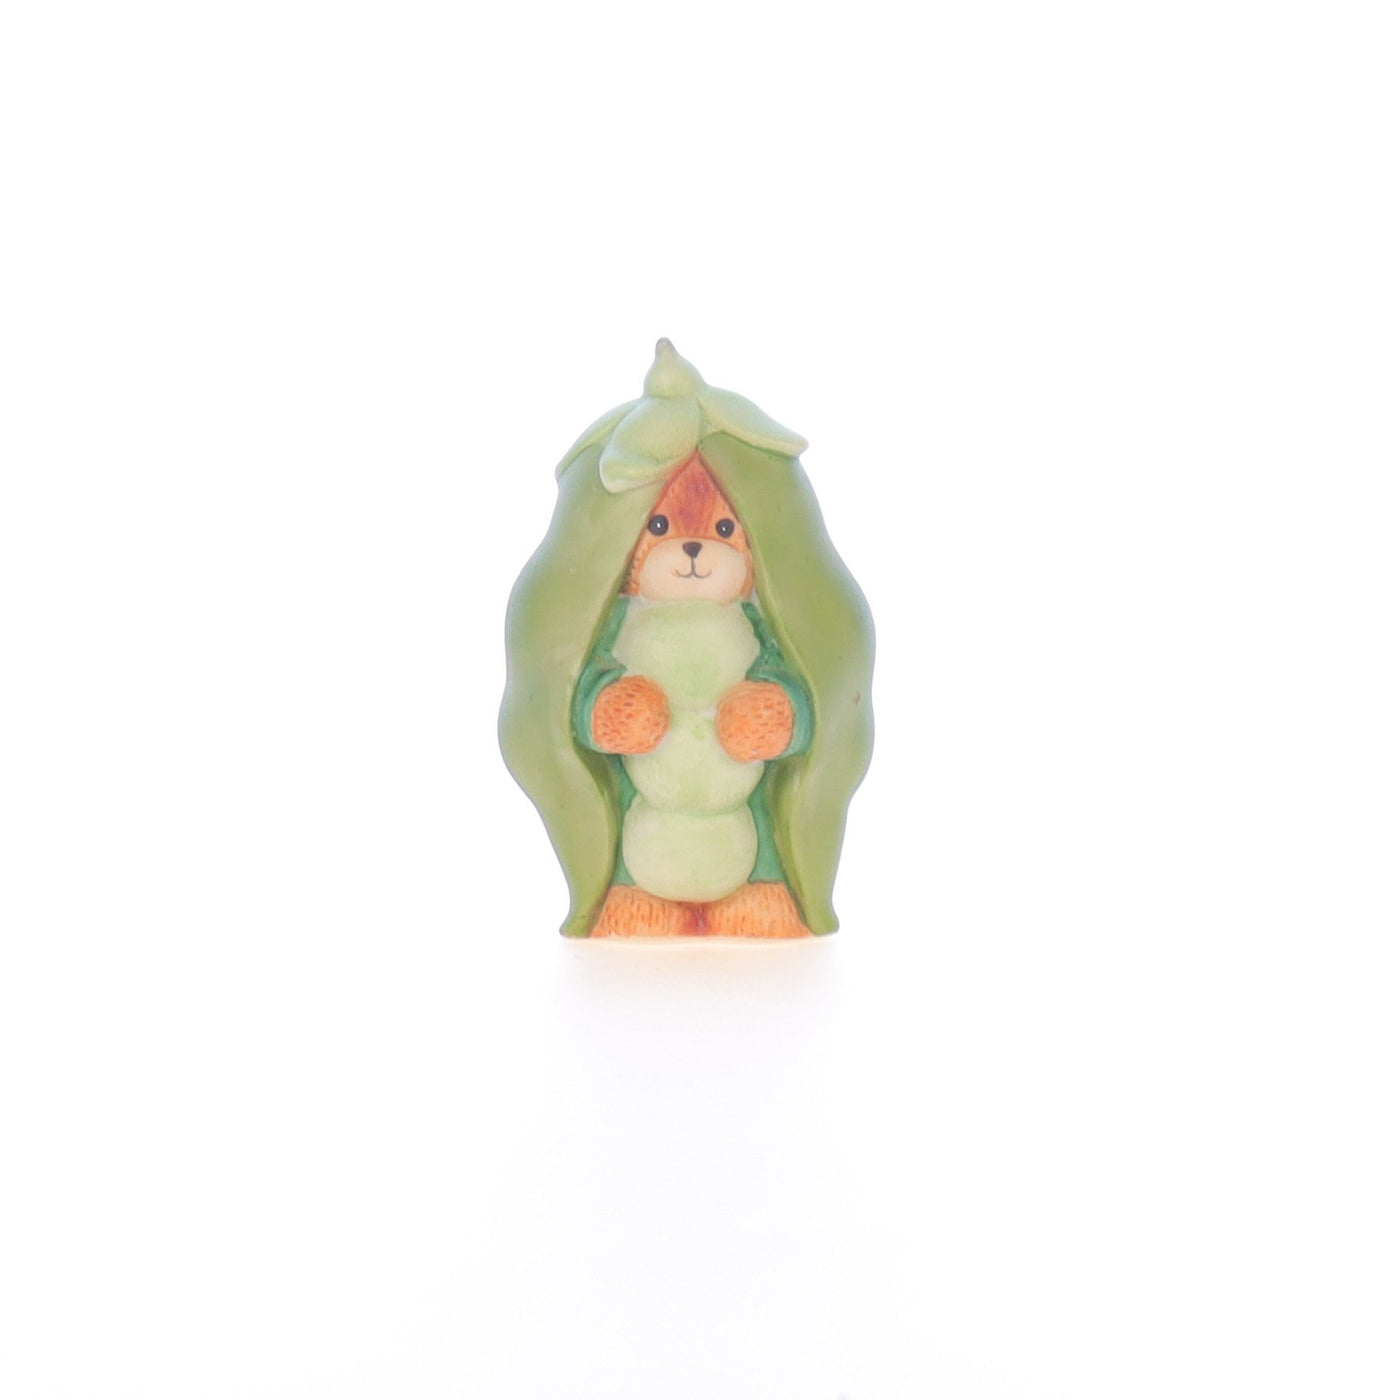 Lucy_And_Me_by_Lucy_Atwell_Porcelain_Figurine_Bear_in_Pea_Costume_Lucy_Unknown_044_01